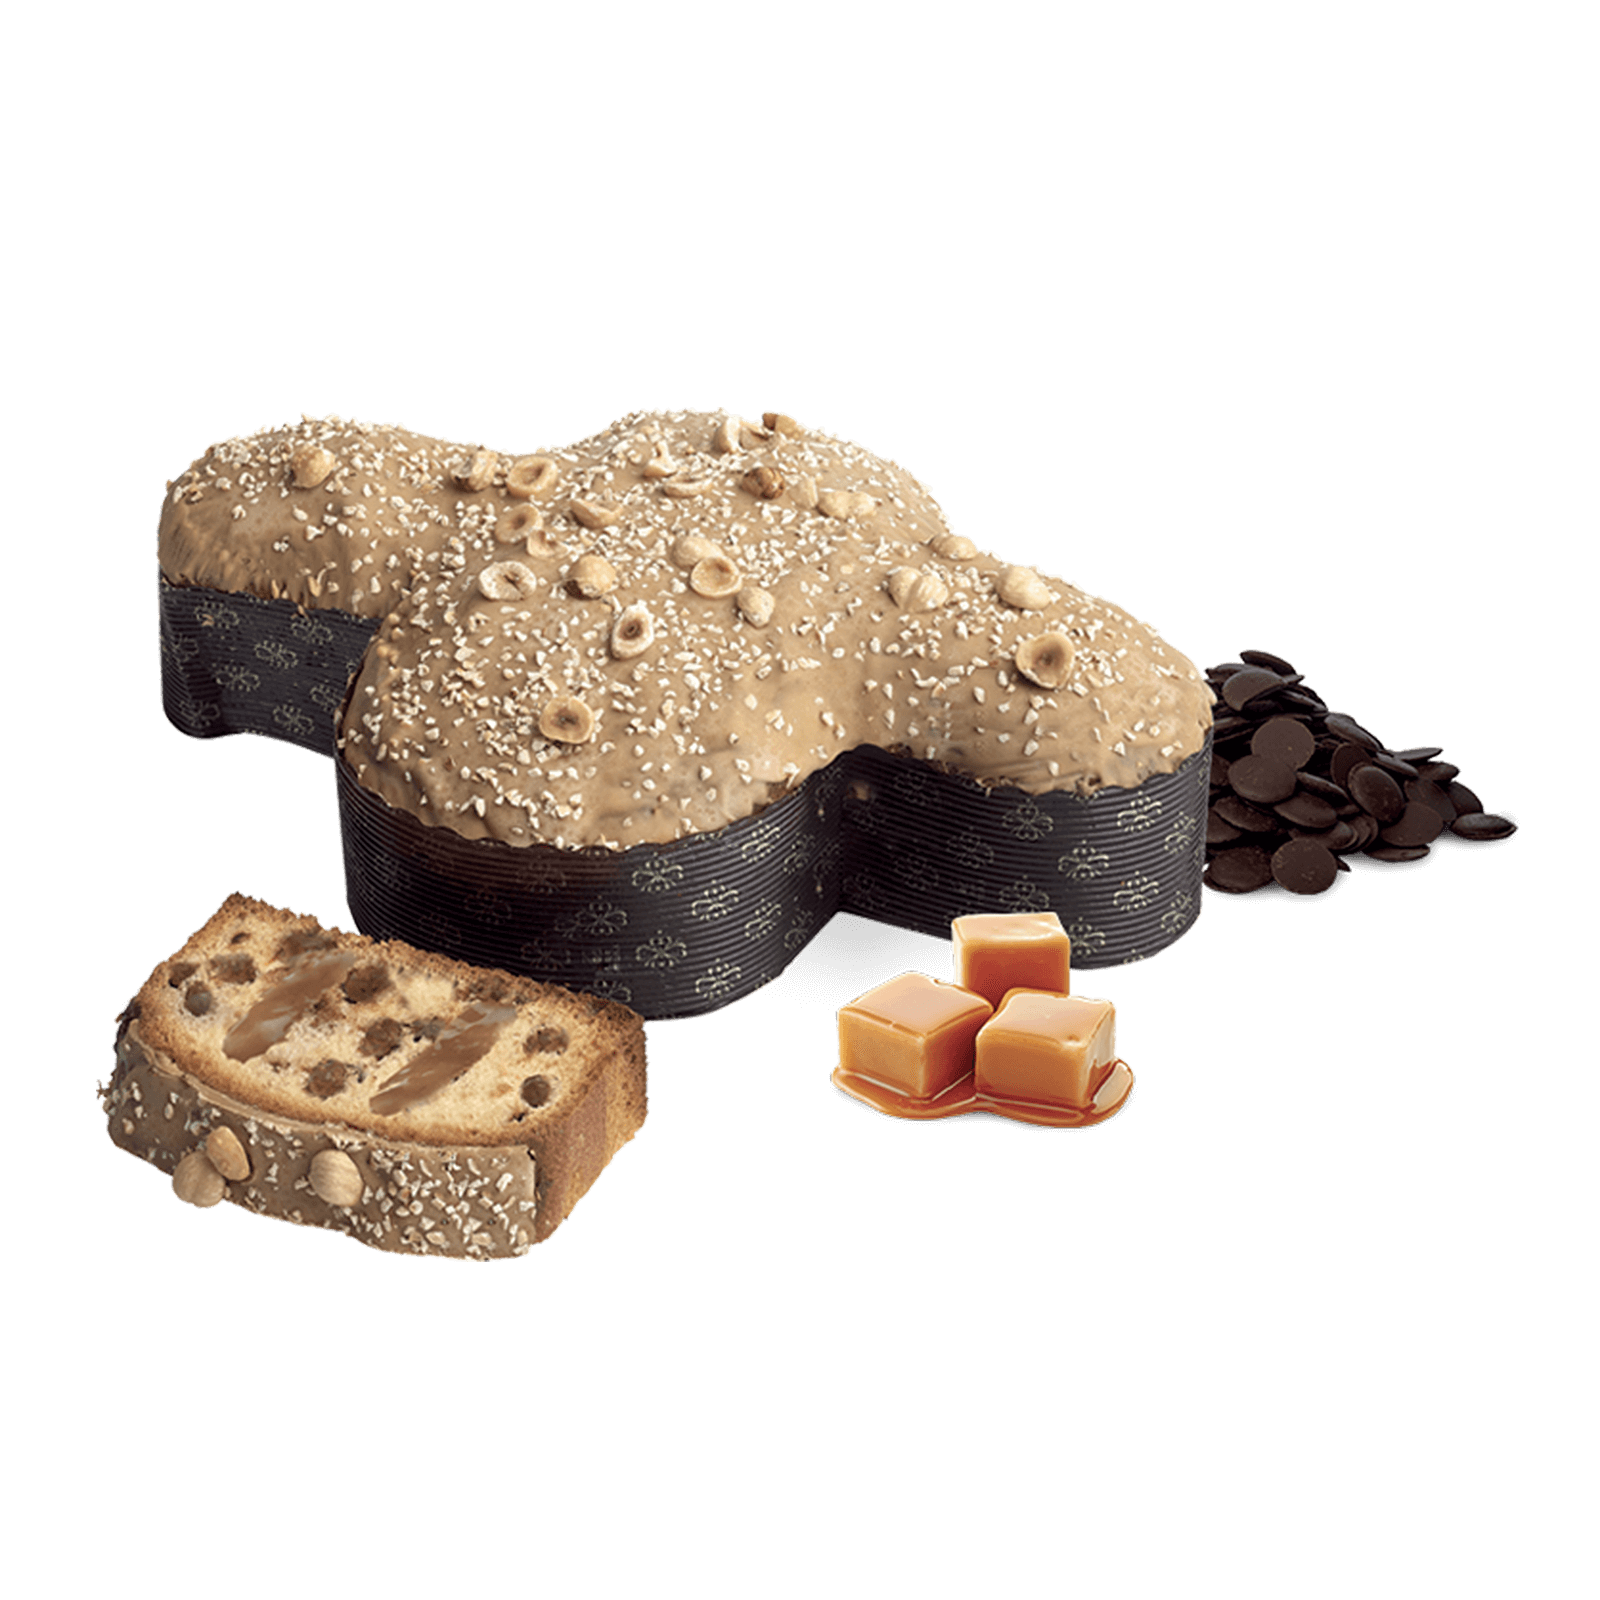 Colomba Salted Caramel – 750g